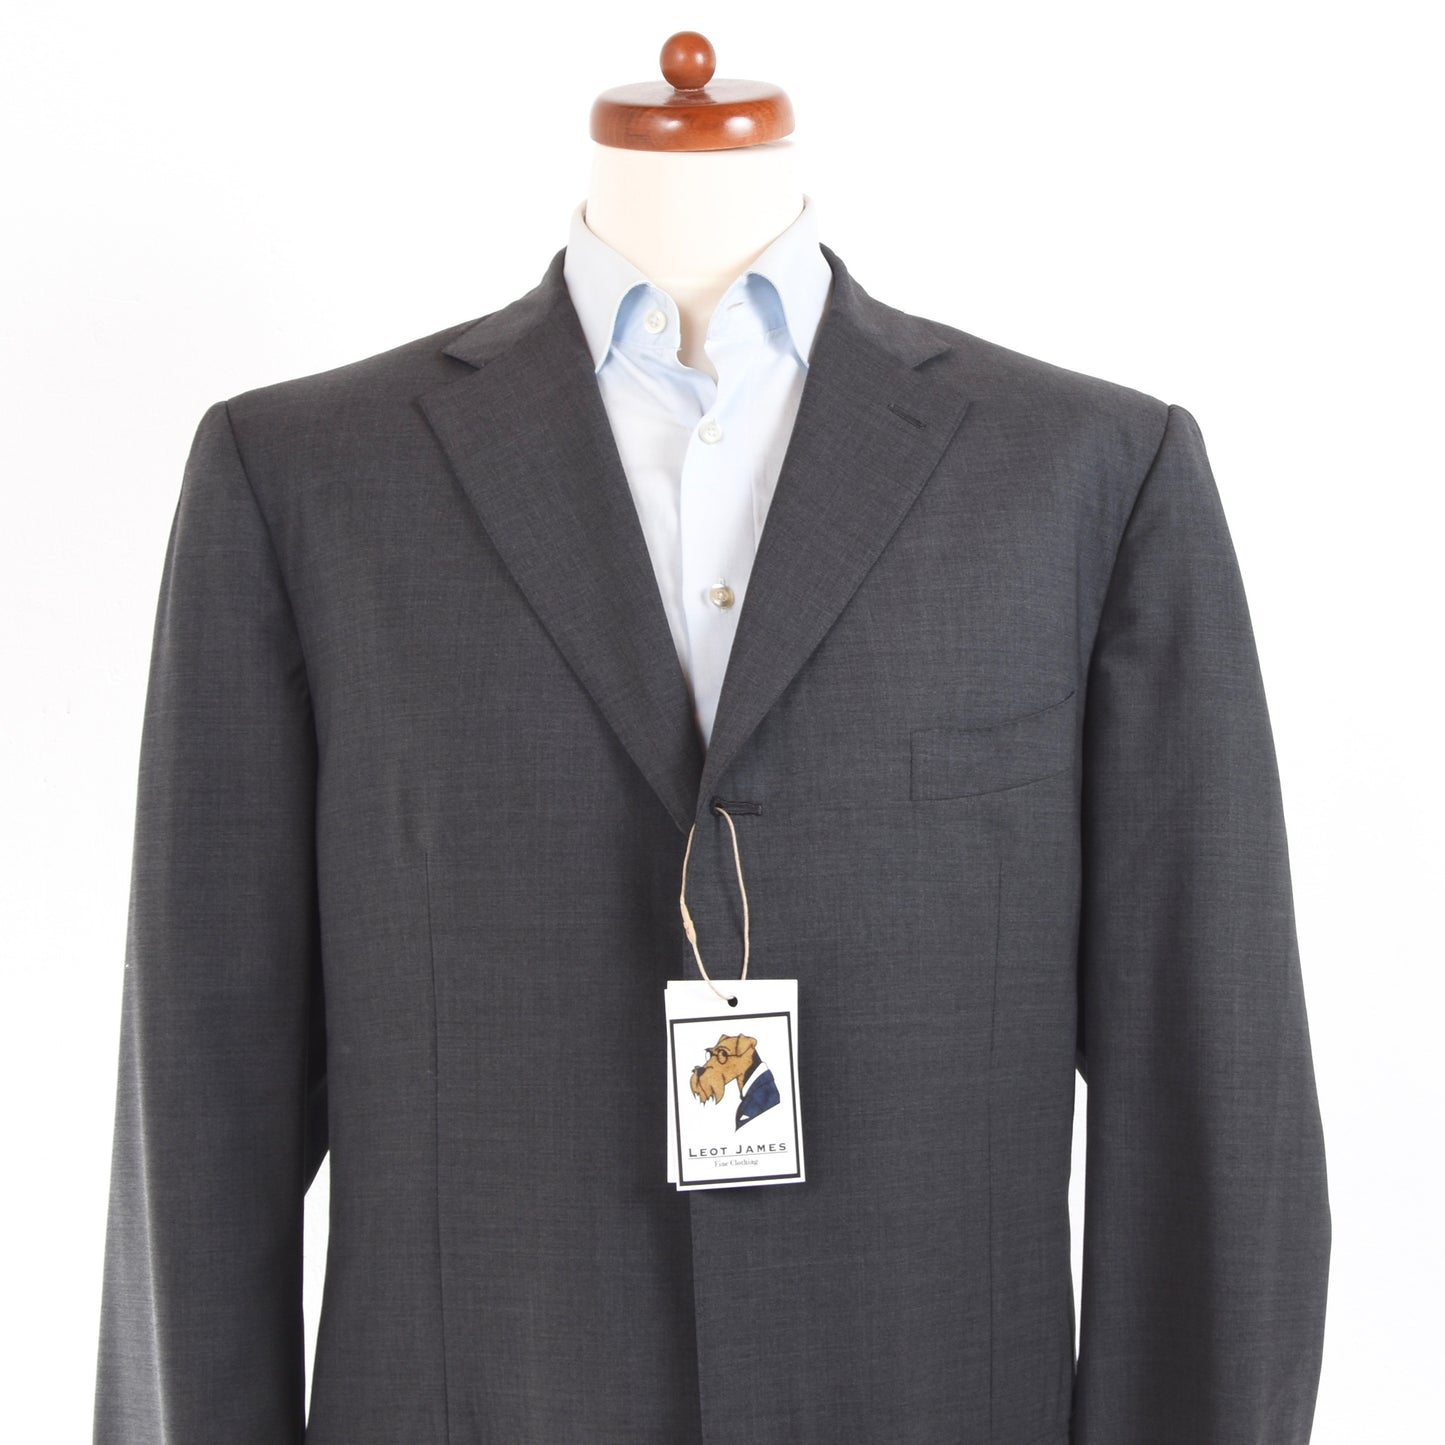 Isaia Napoli Super 130s Wool Suit Size 56 LONG - Grey